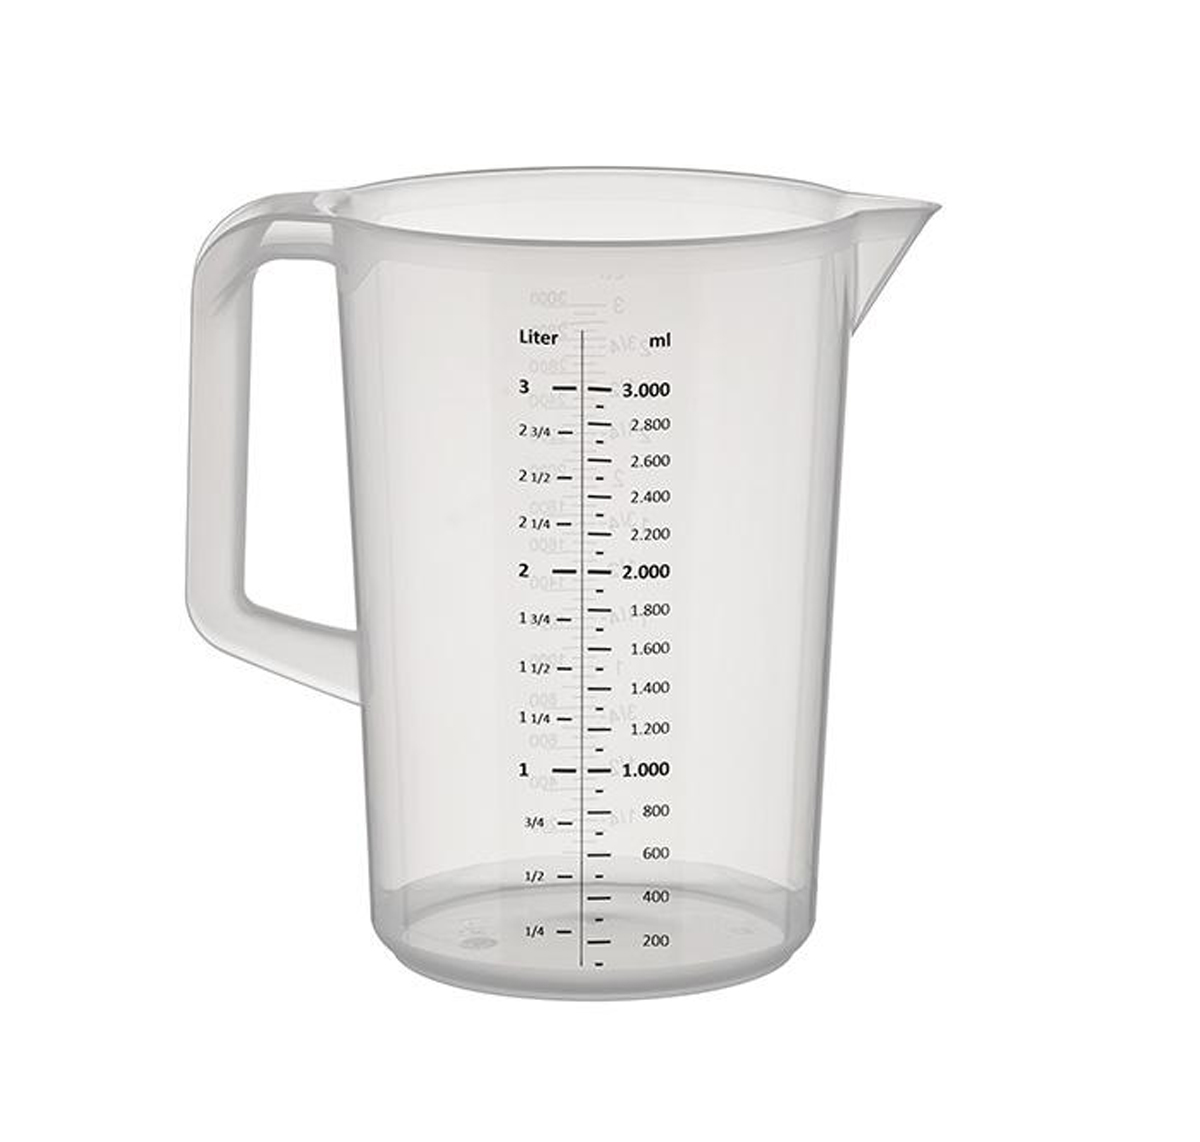 3L Messbecher mit Bayer-Logo Made in Germany, 20,99 €